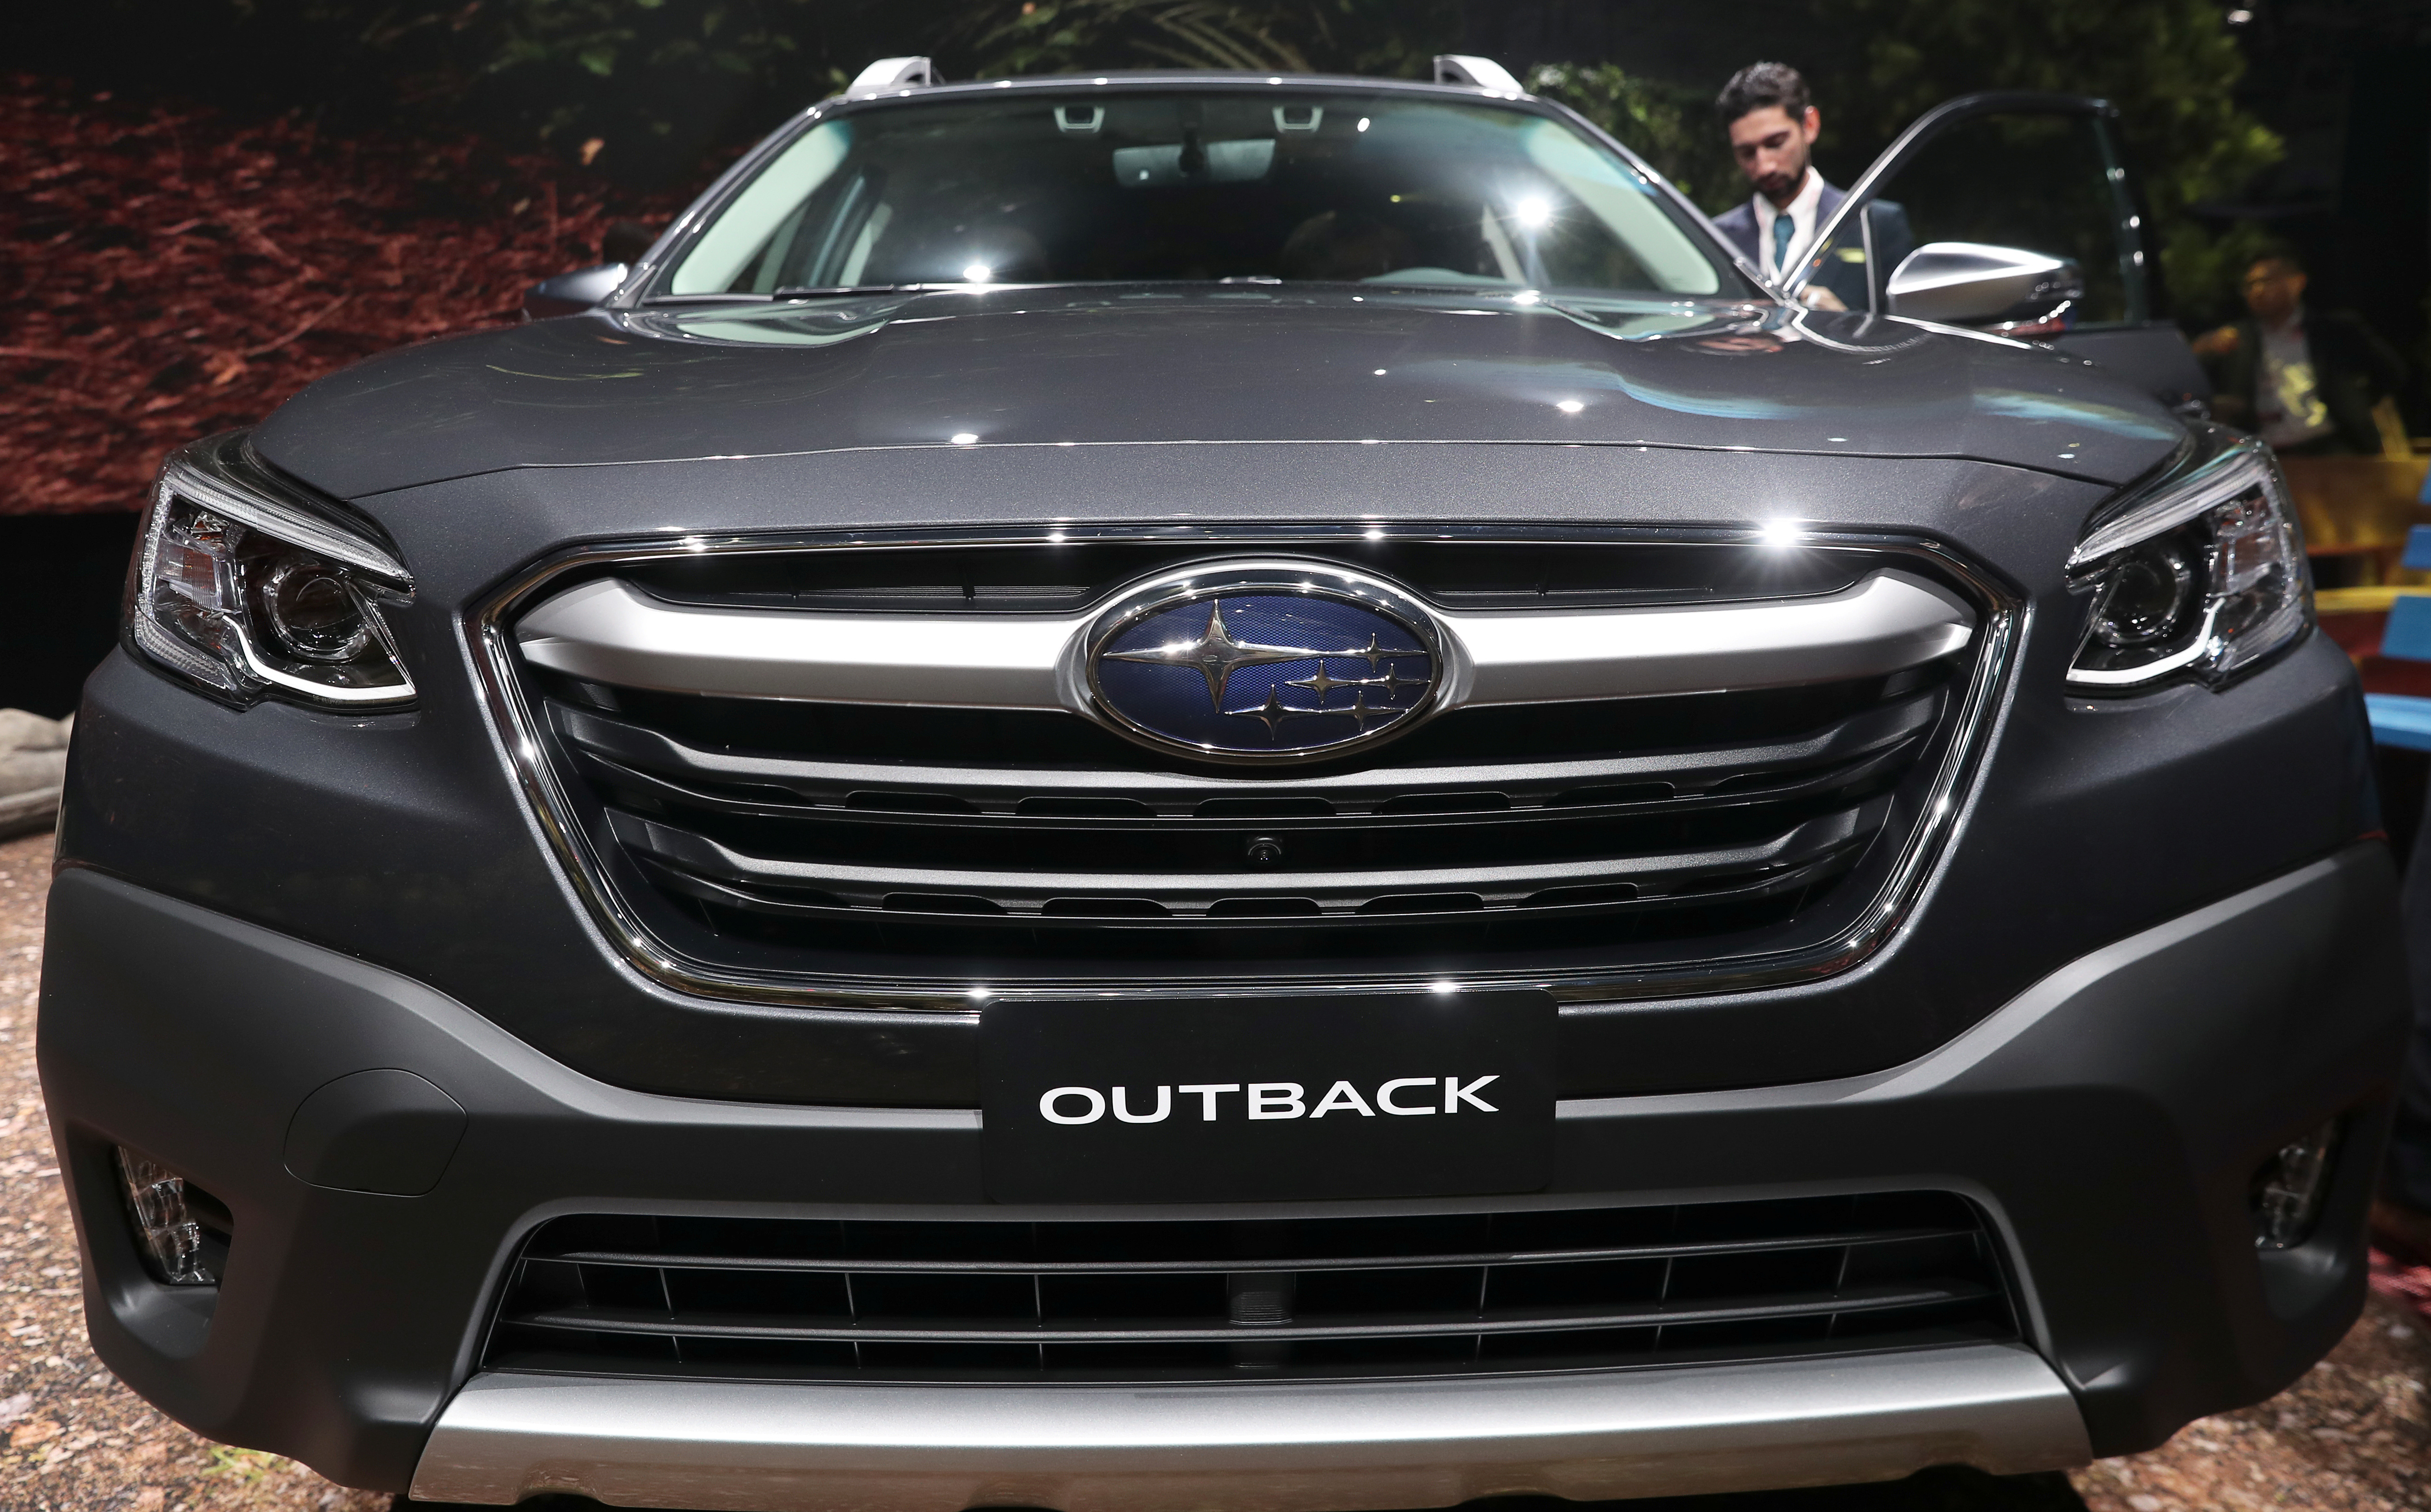 The 2020 Subaru Outback is revealed at the 2019 New York International Auto Show in New York City